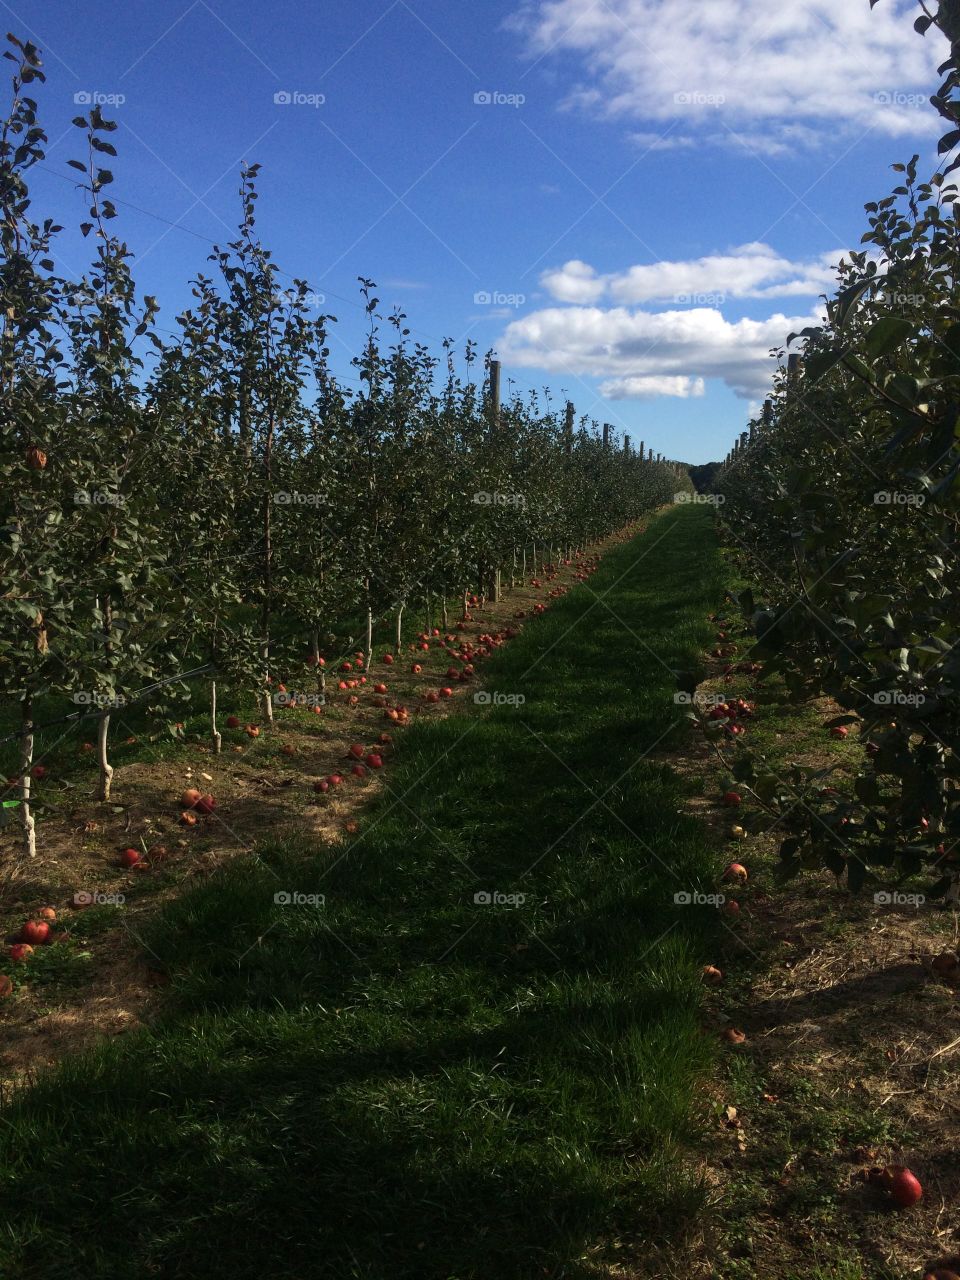 Apple-picking: a fall must-do on Long Island.